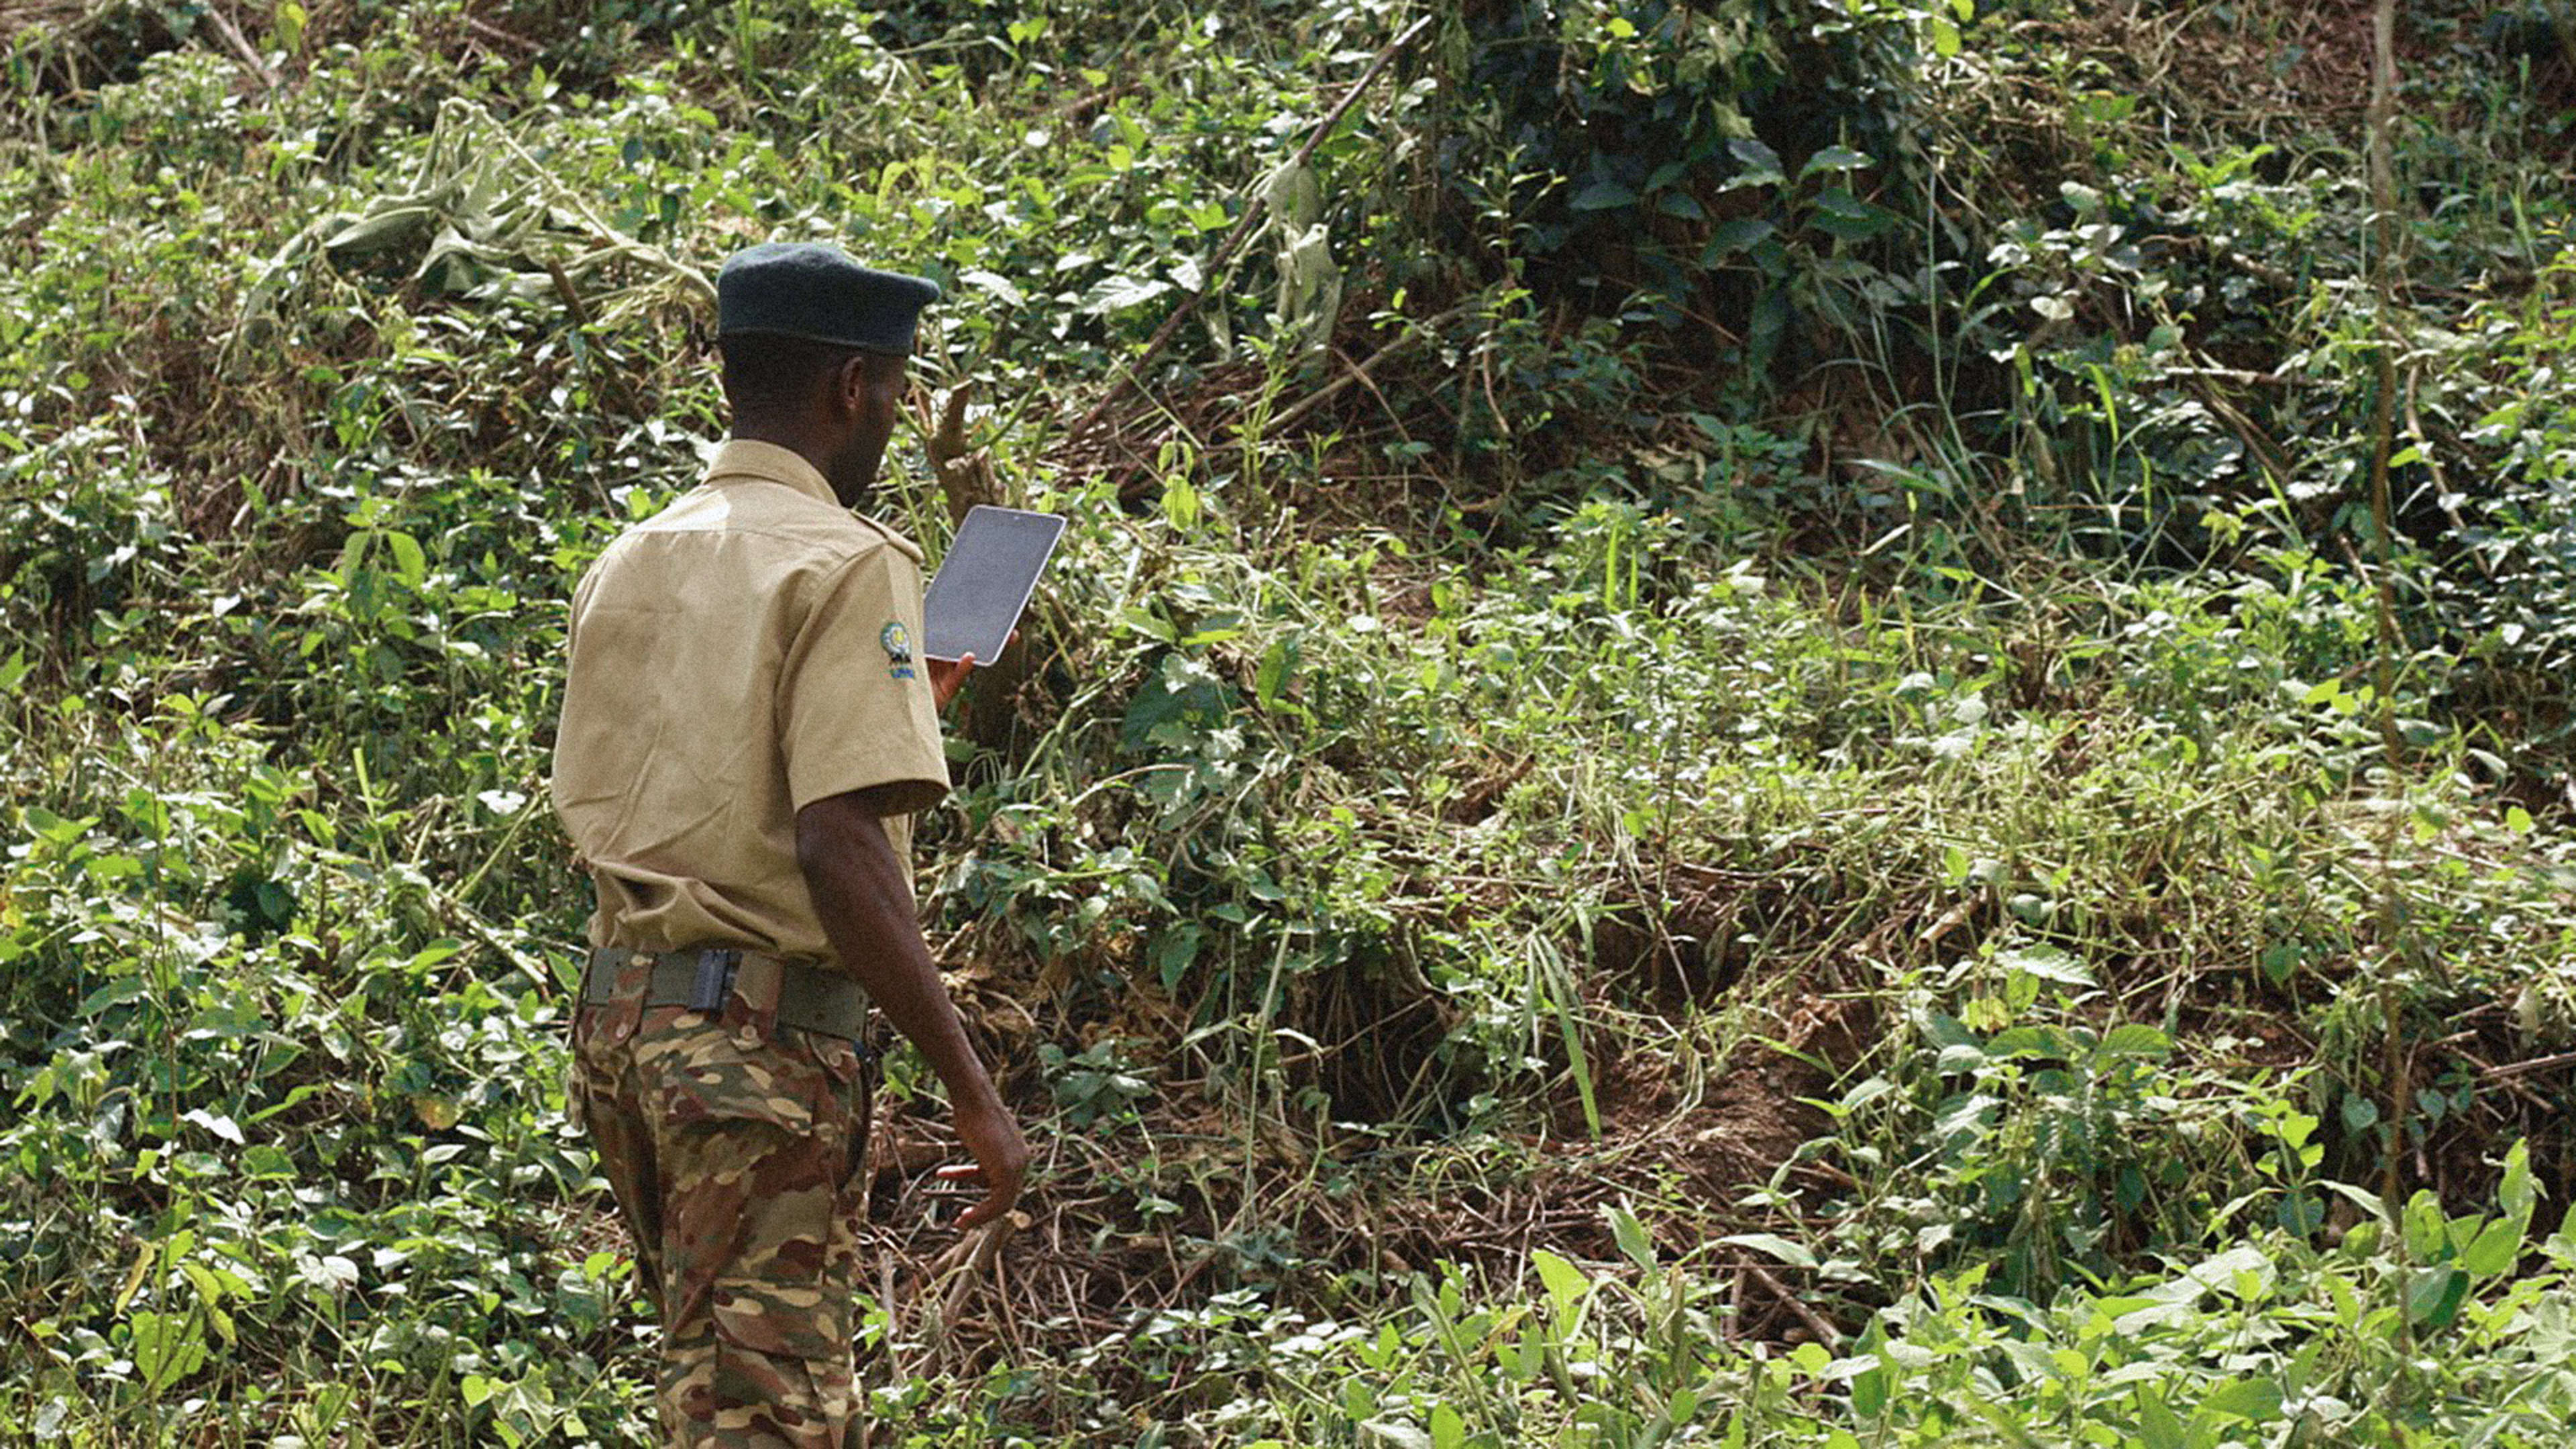 This App Helps Forest Rangers Without Internet Access Find Illegal Activity